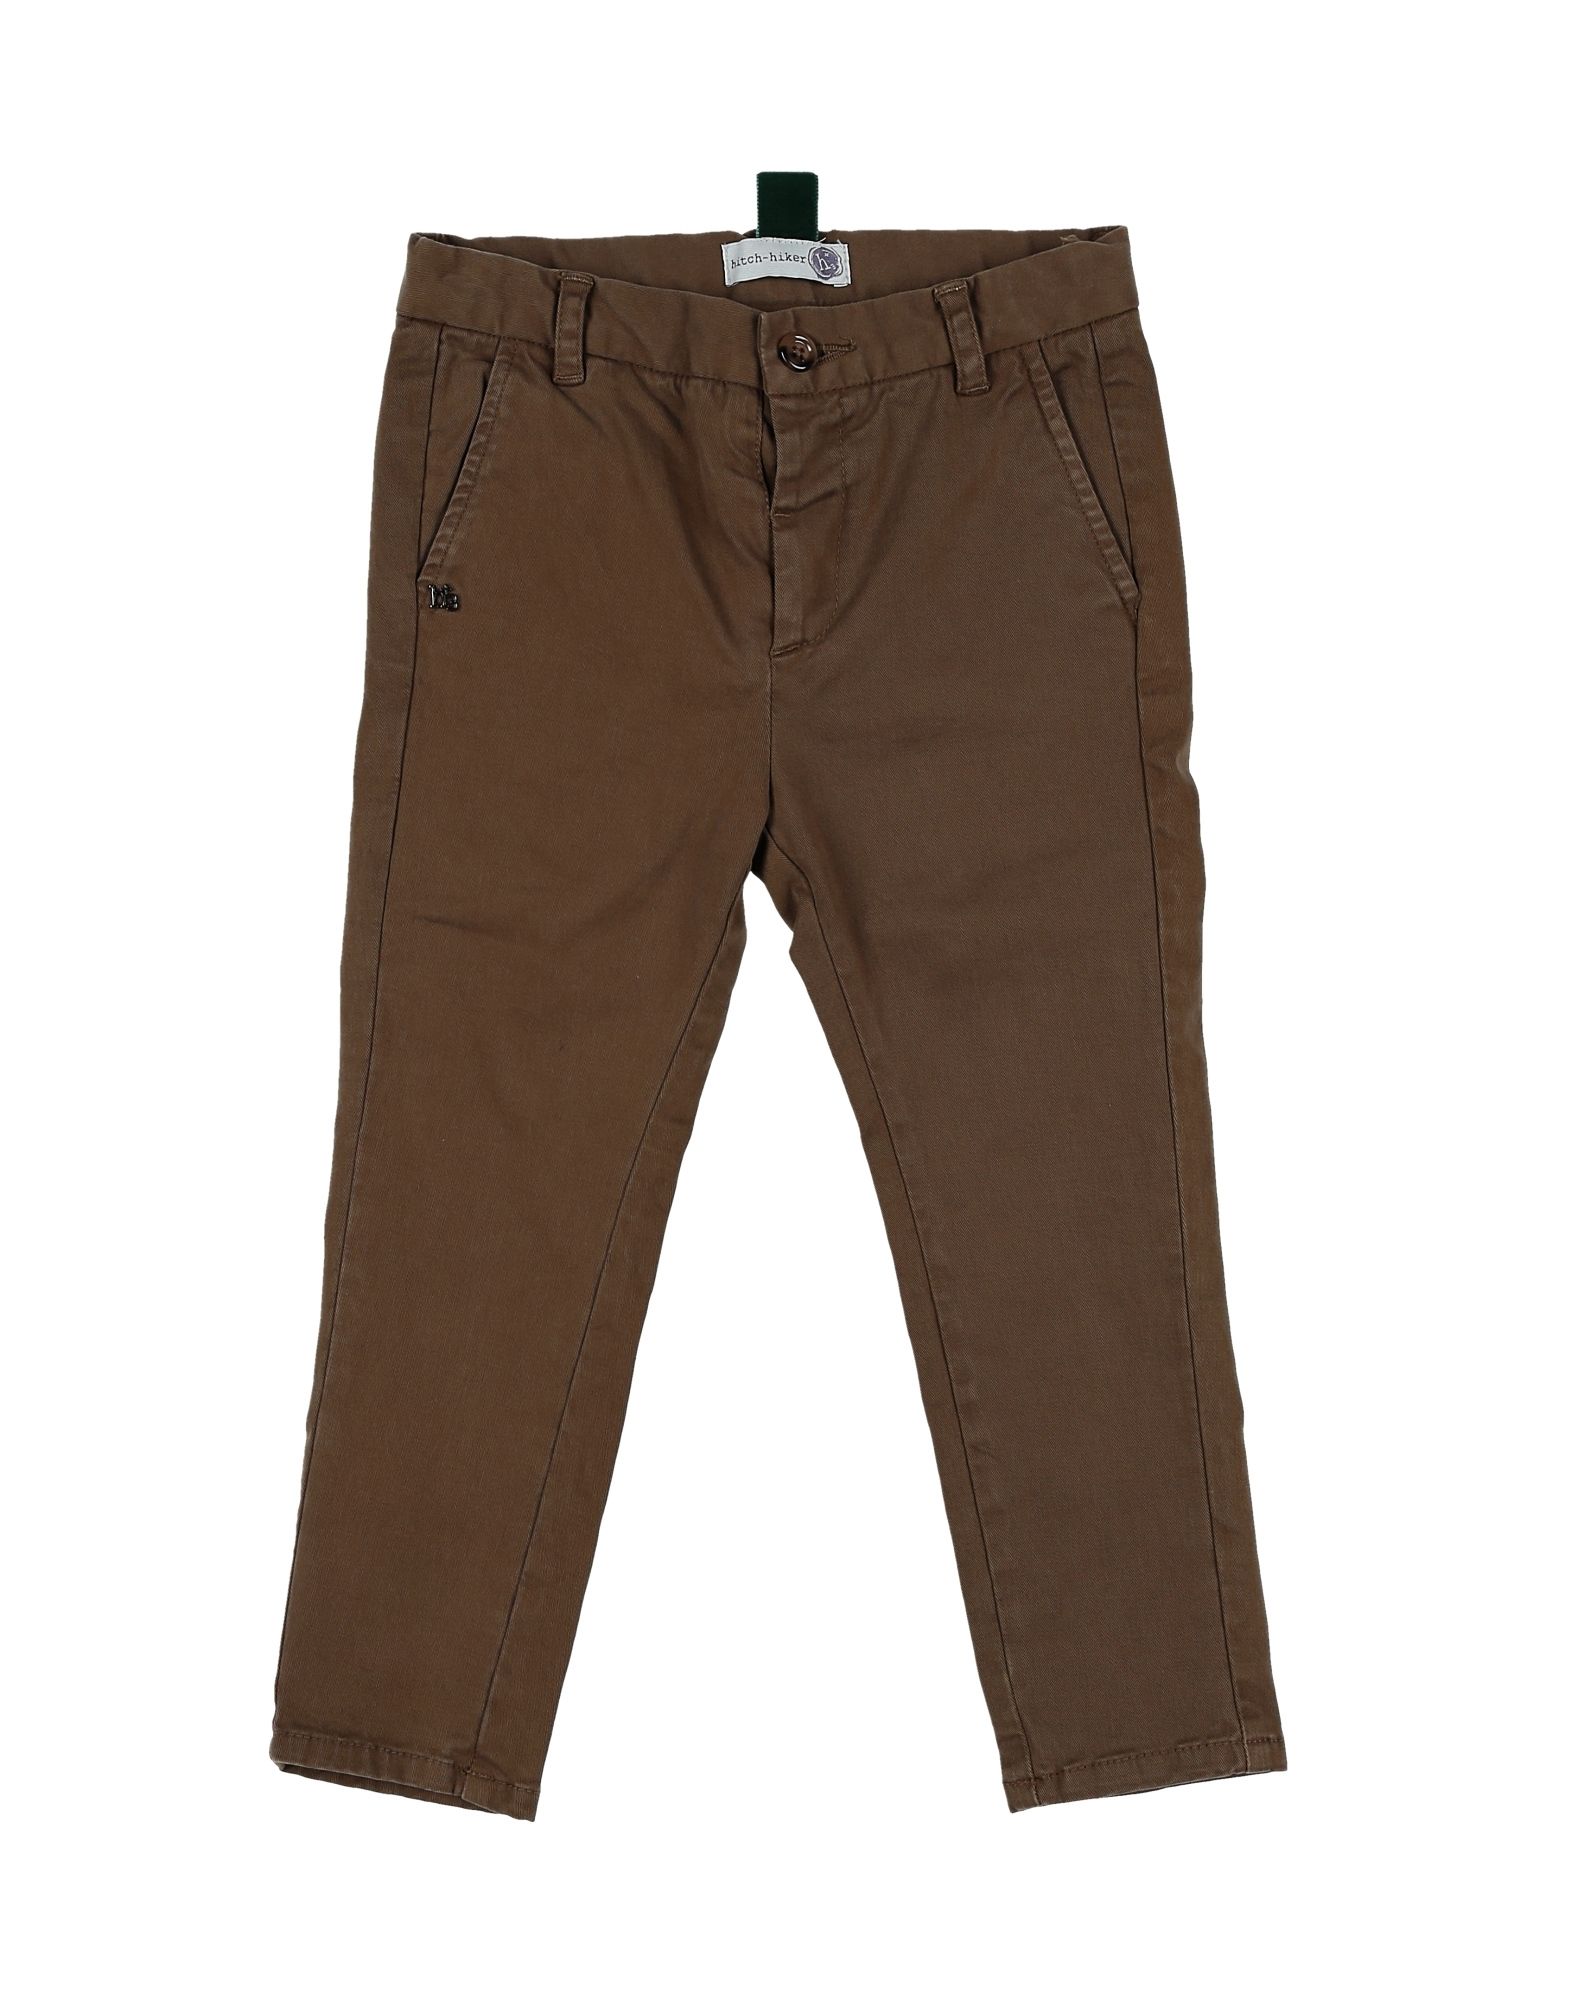 HITCH-HIKER Casual pants